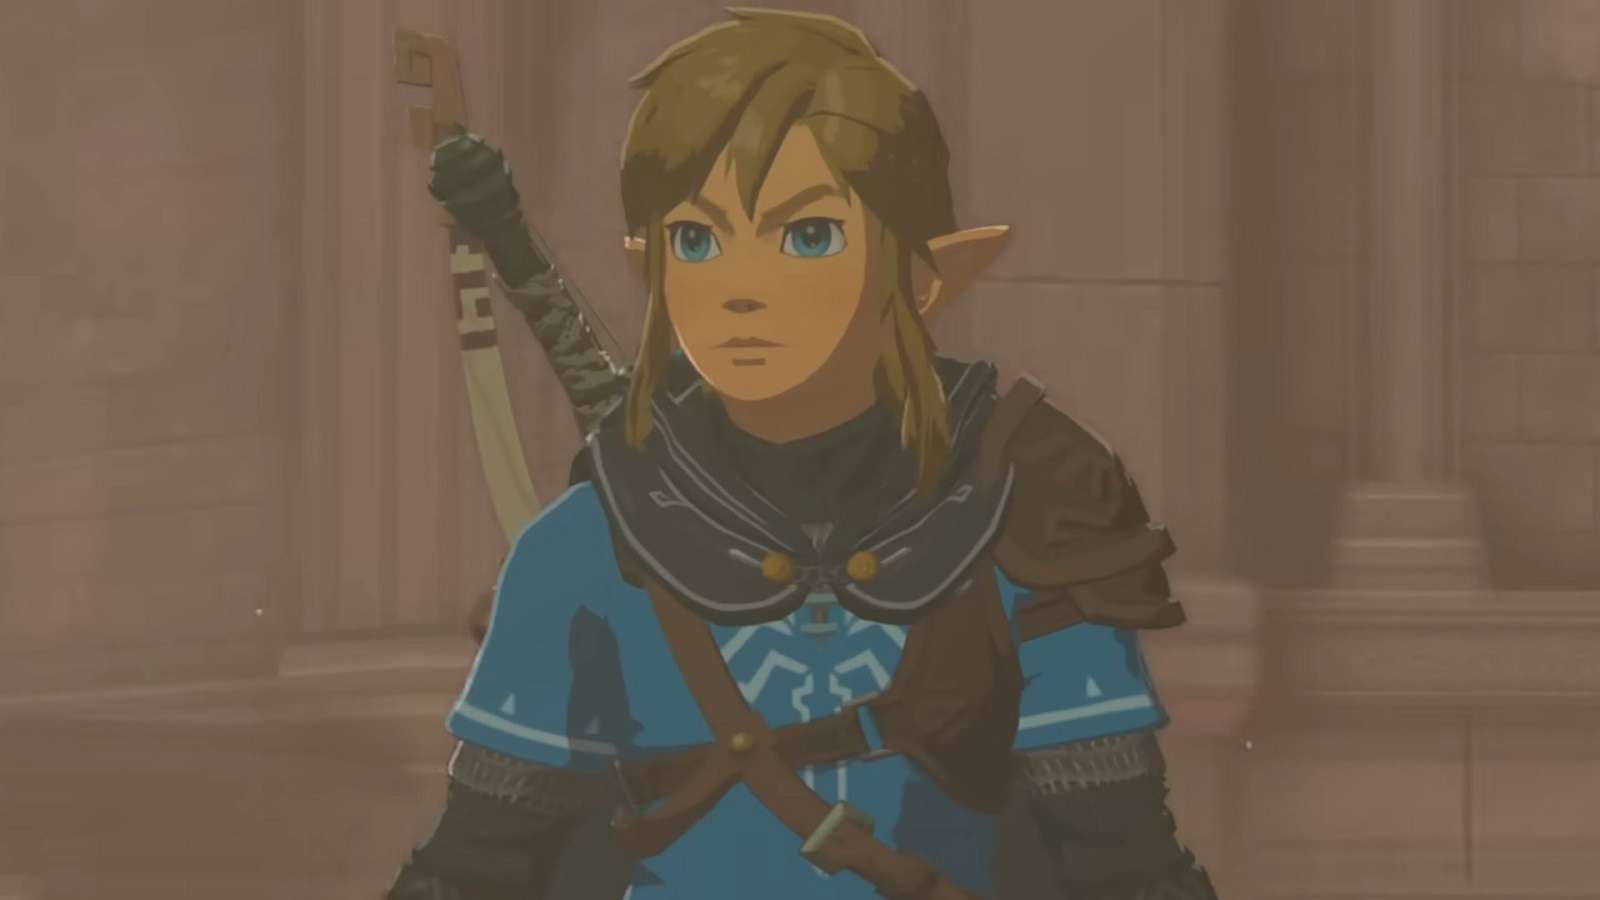 Link wearing the Champion's Tunic